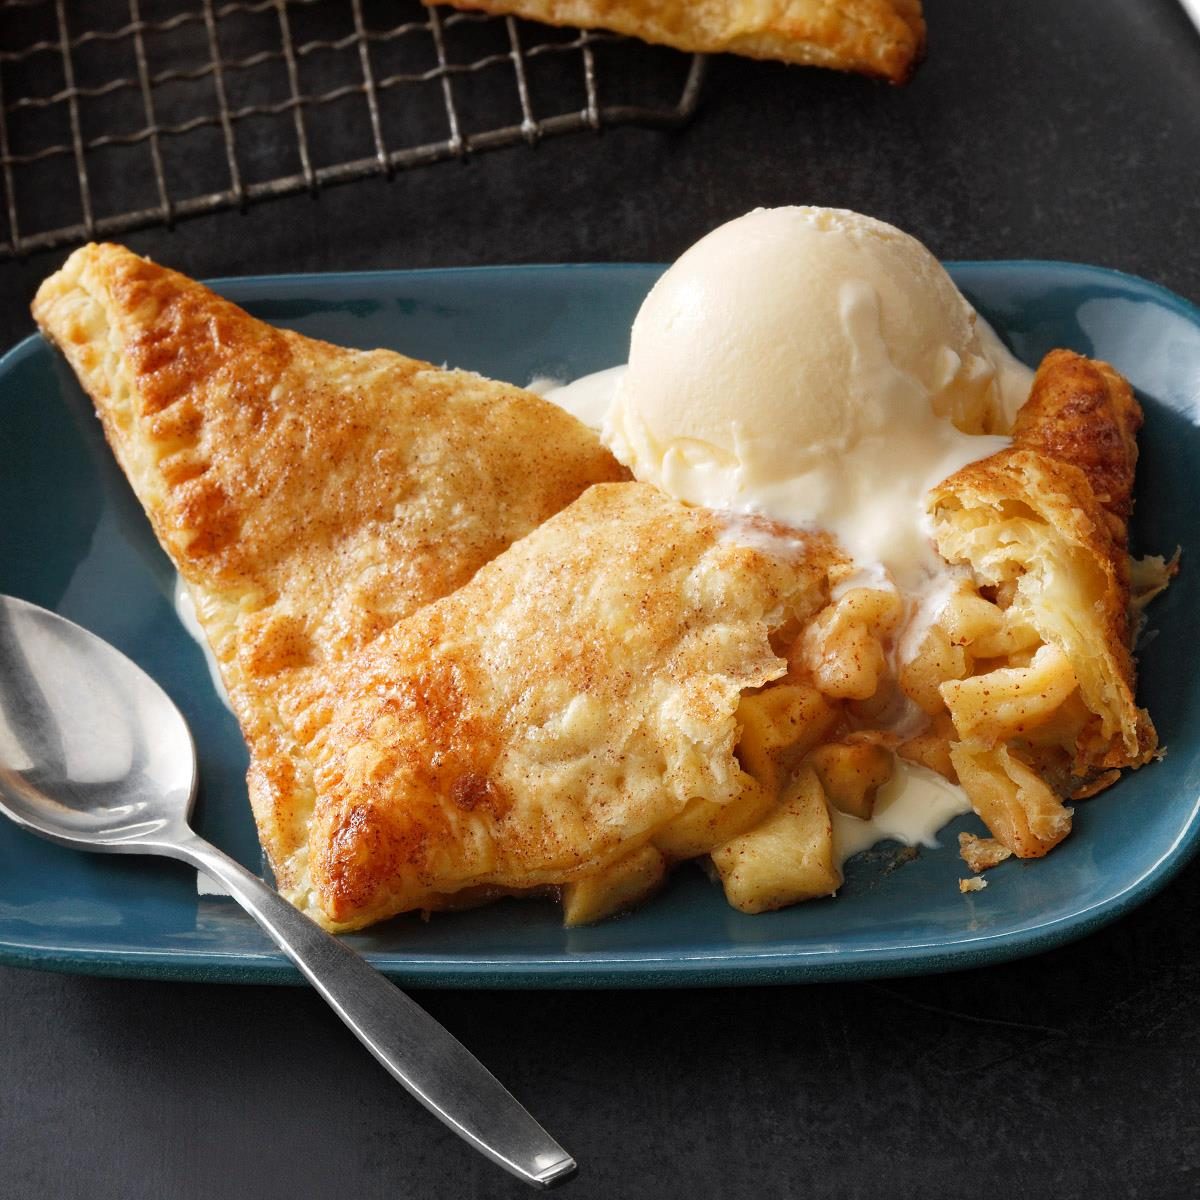 https://www.tasteofhome.com/wp-content/uploads/2018/01/Puff-Pastry-Apple-Turnovers_EXPS_FRBZ22_34202_MD_03_11_1b.jpg?fit=700%2C1024